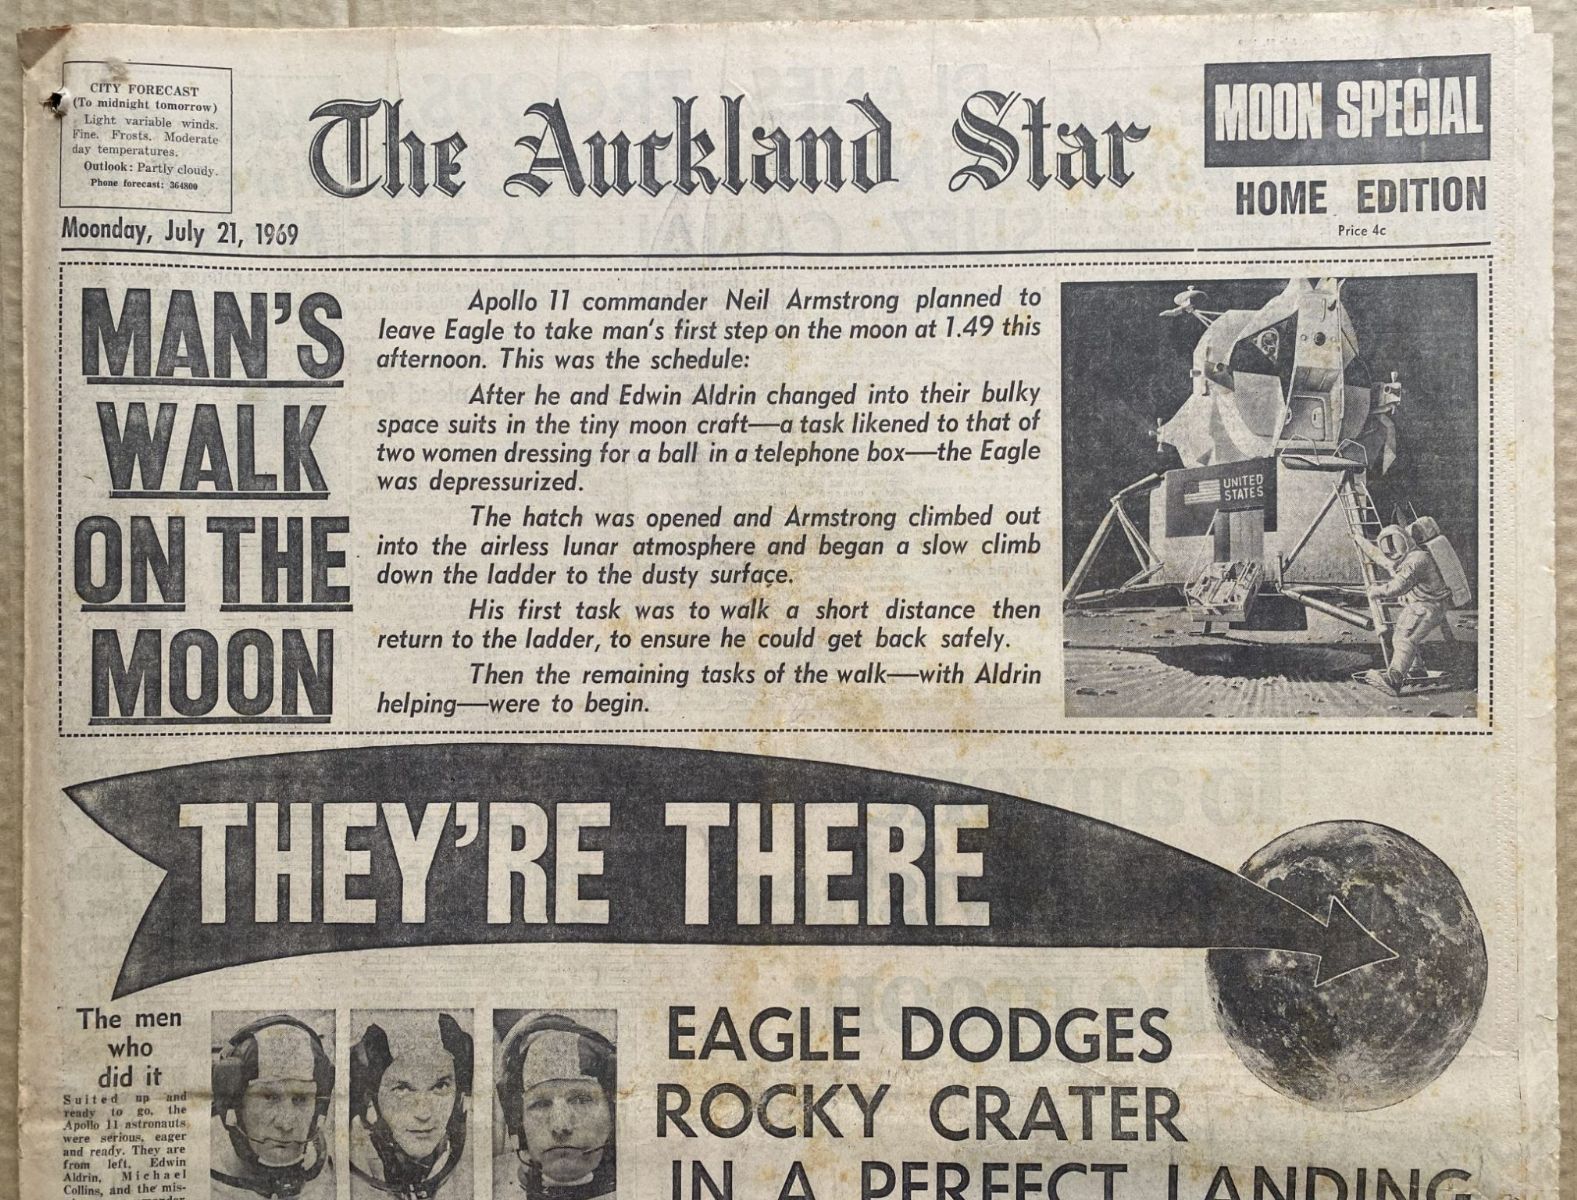 OLD NEWSPAPER: The Auckland Star, 21 July 1969 - Moon Landing Special